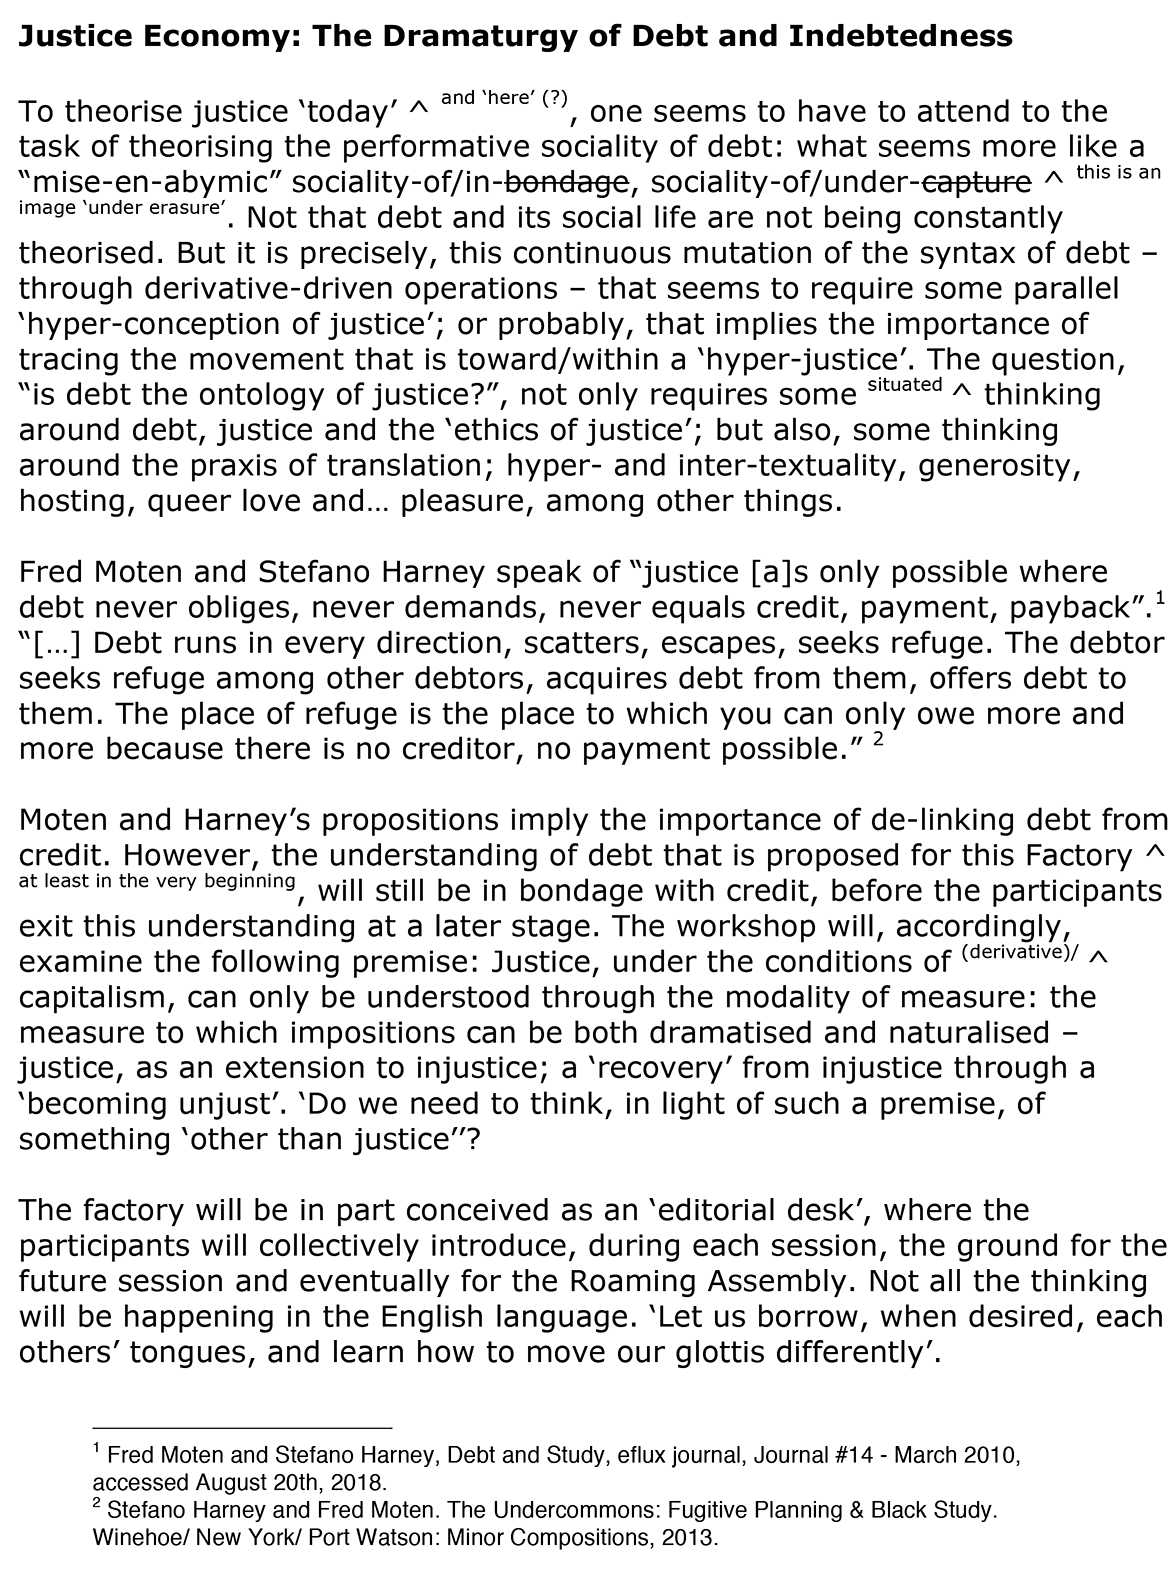 Justice Economy: The Dramaturgy of Debt and Indebtedness - superscripts and strikethroughs